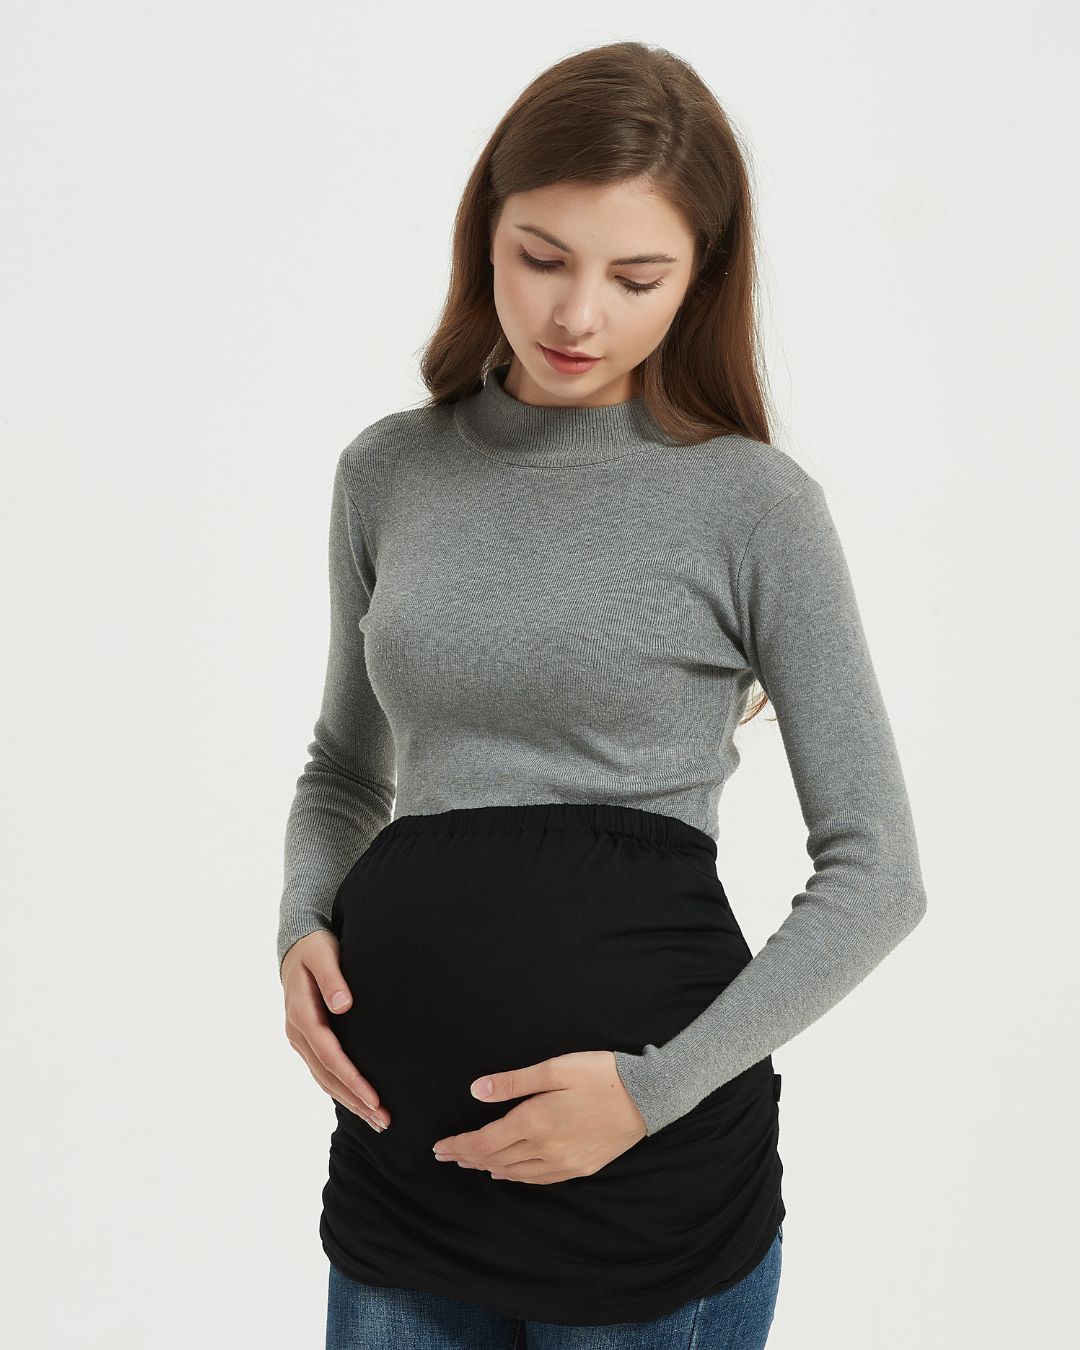 Svanah radiation shielded maternity belly band - A pregnancy must have